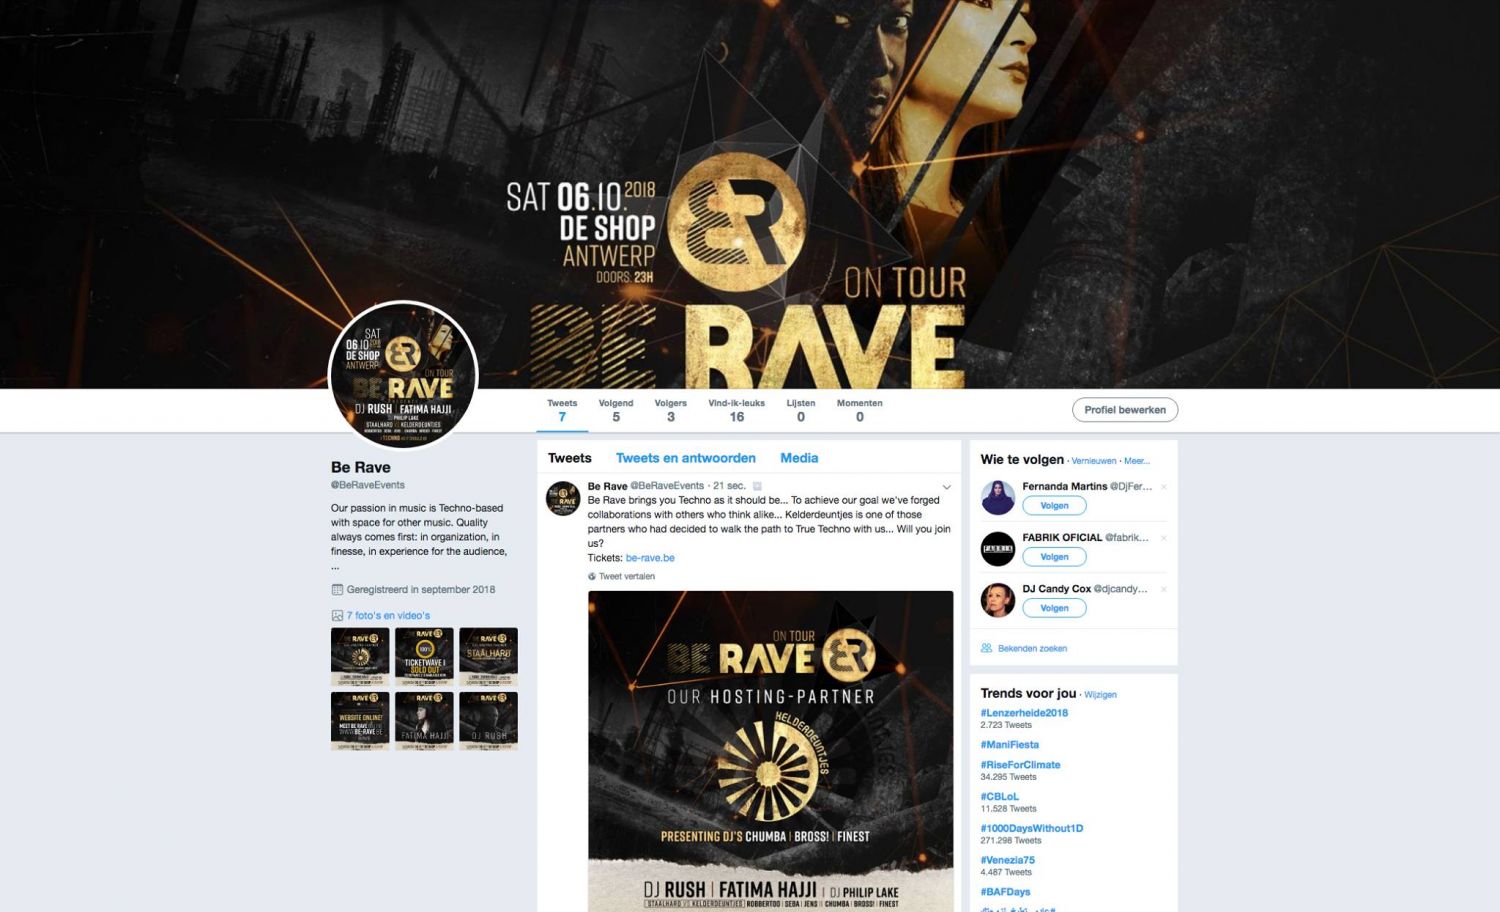 Be Rave on Twitter